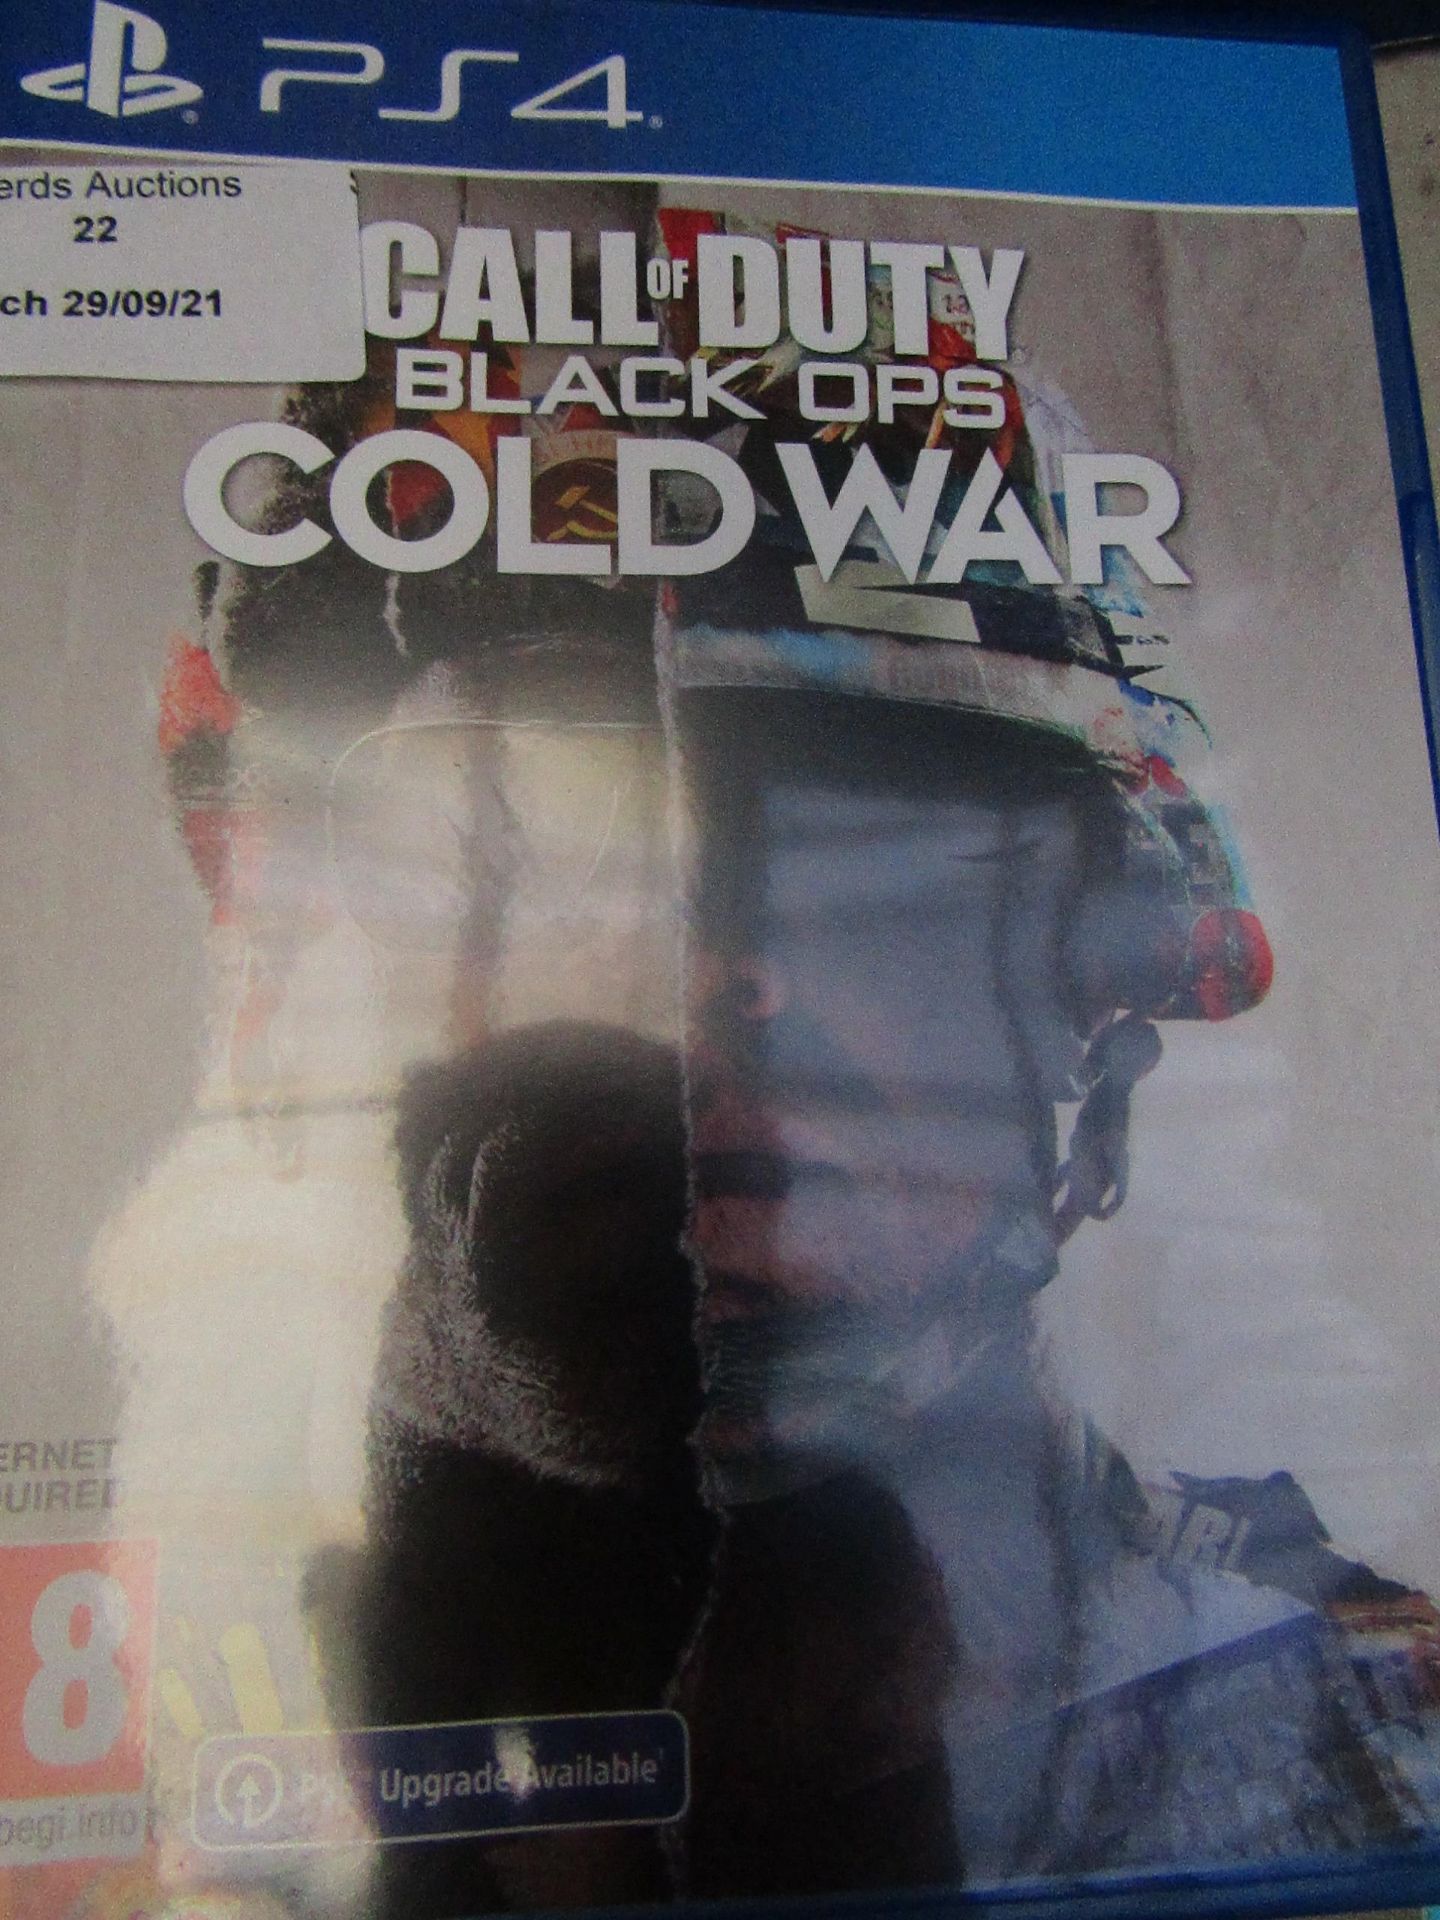 Call of Duty Black Ops cold war game for PS4, unchecked in packaging